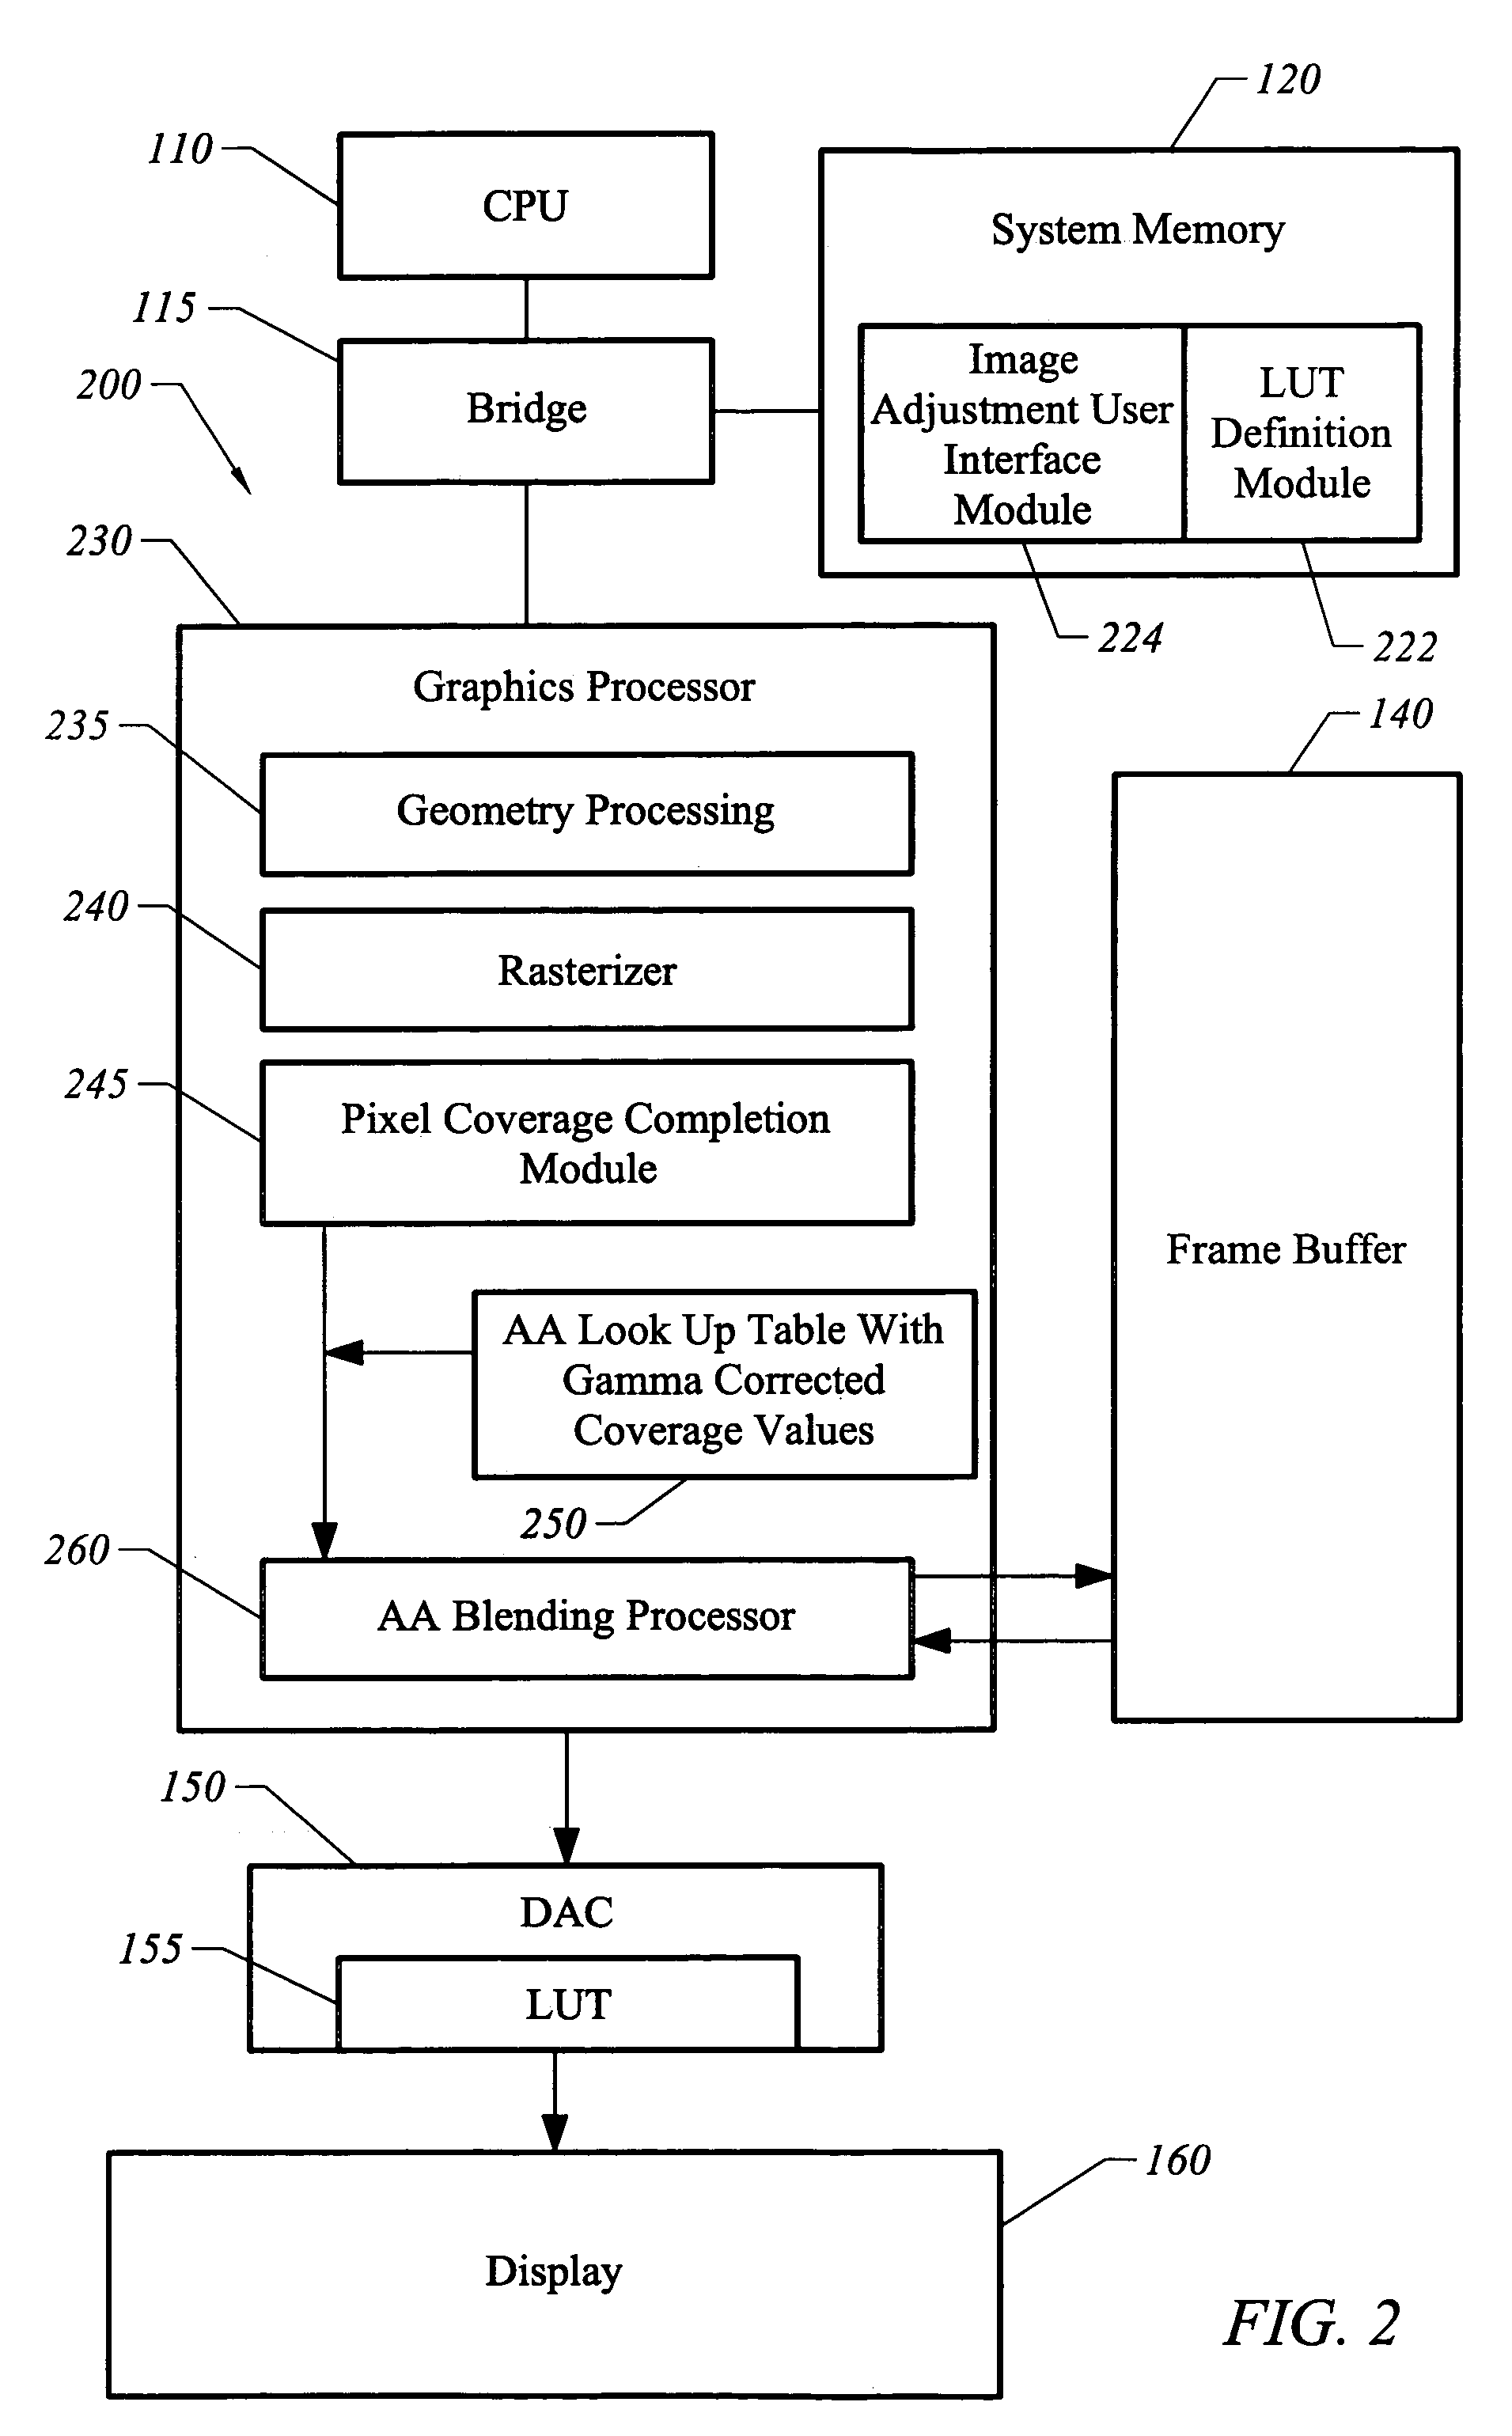 Apparatus, system, and method for gamma correction of smoothed primitives